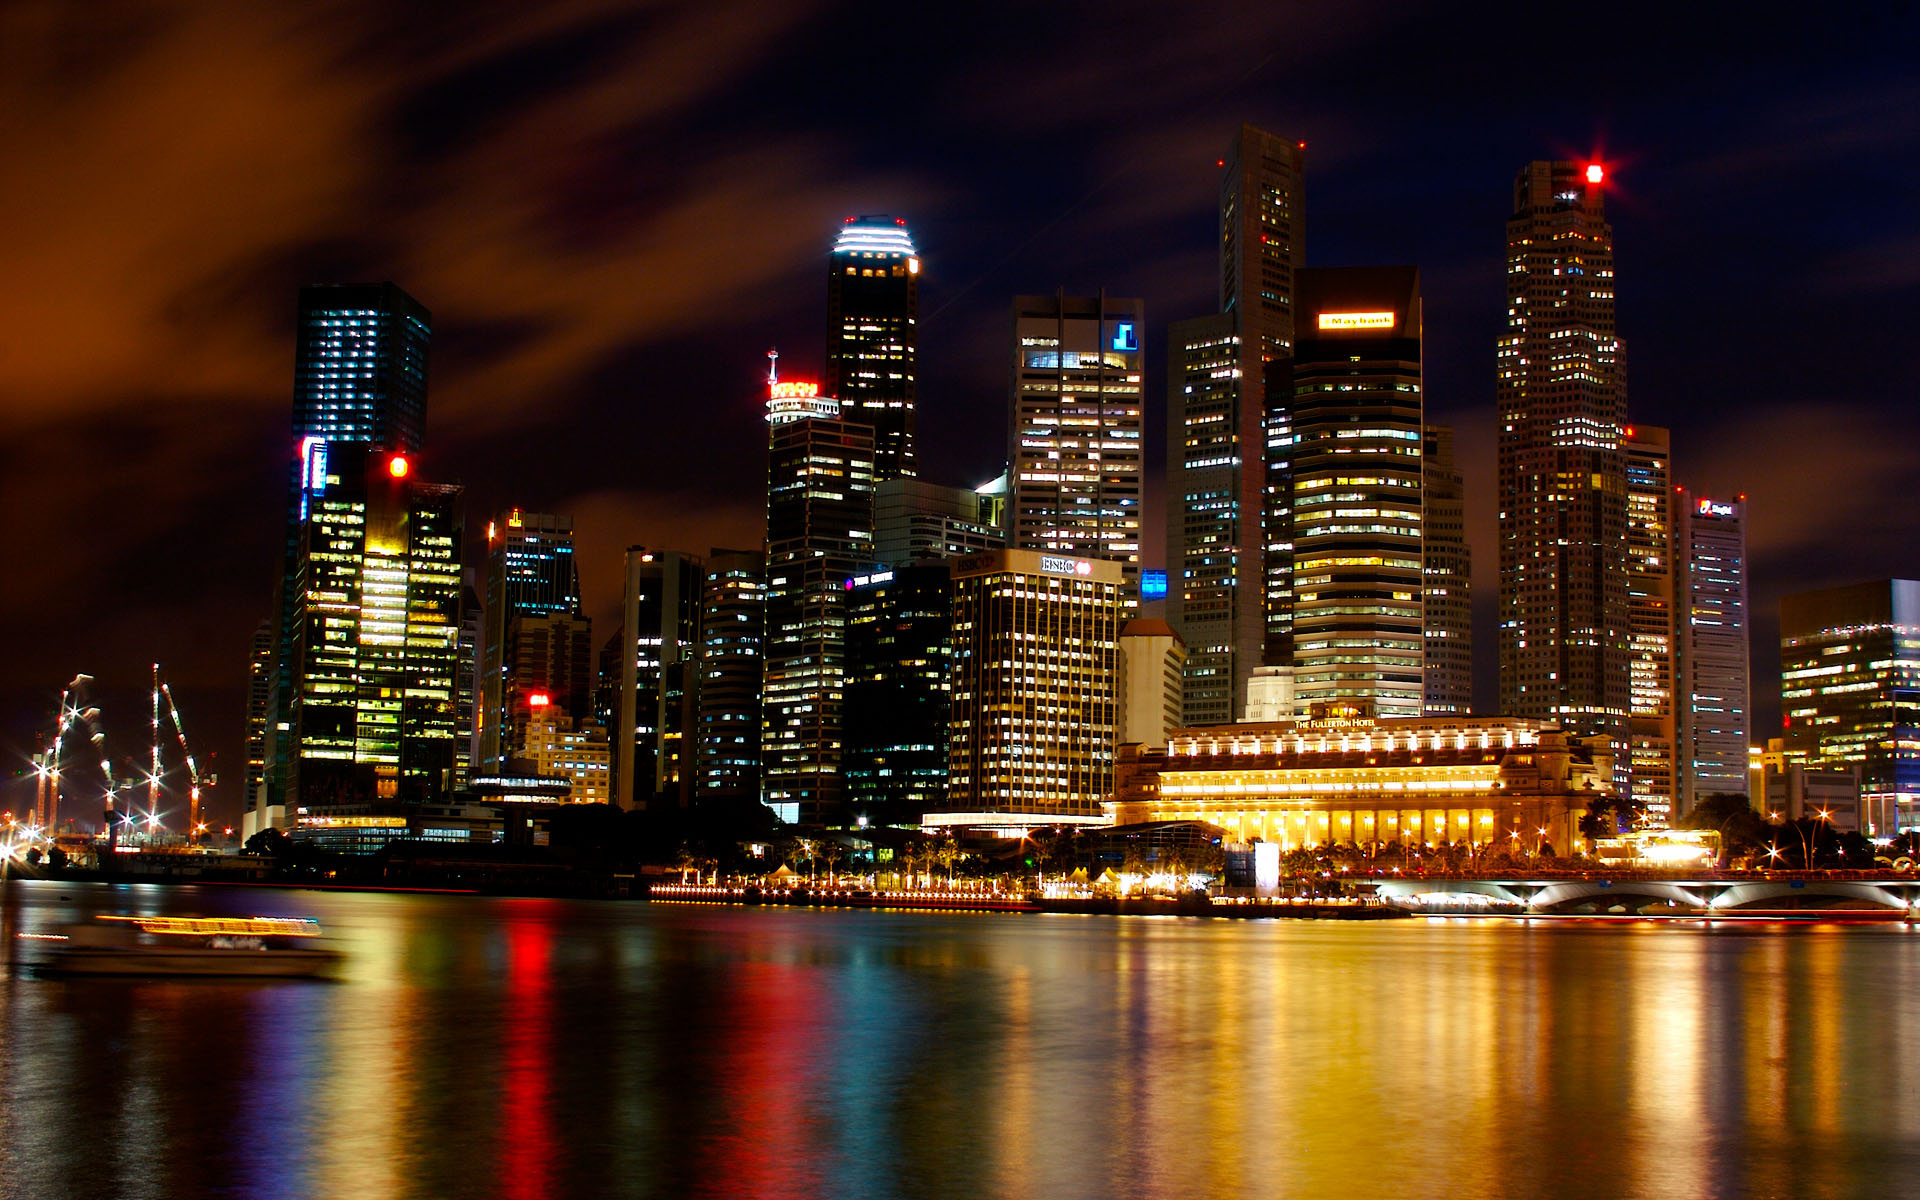 singapore, Port, Harbor, Bay, Sound, Water, Reflection, Hdr, World, Cities, Architecture, Buildings, Skyscrapers, Skyline, Cityscape, Scapes, Night, Lights, Window, Sign, Neon, Color Wallpaper